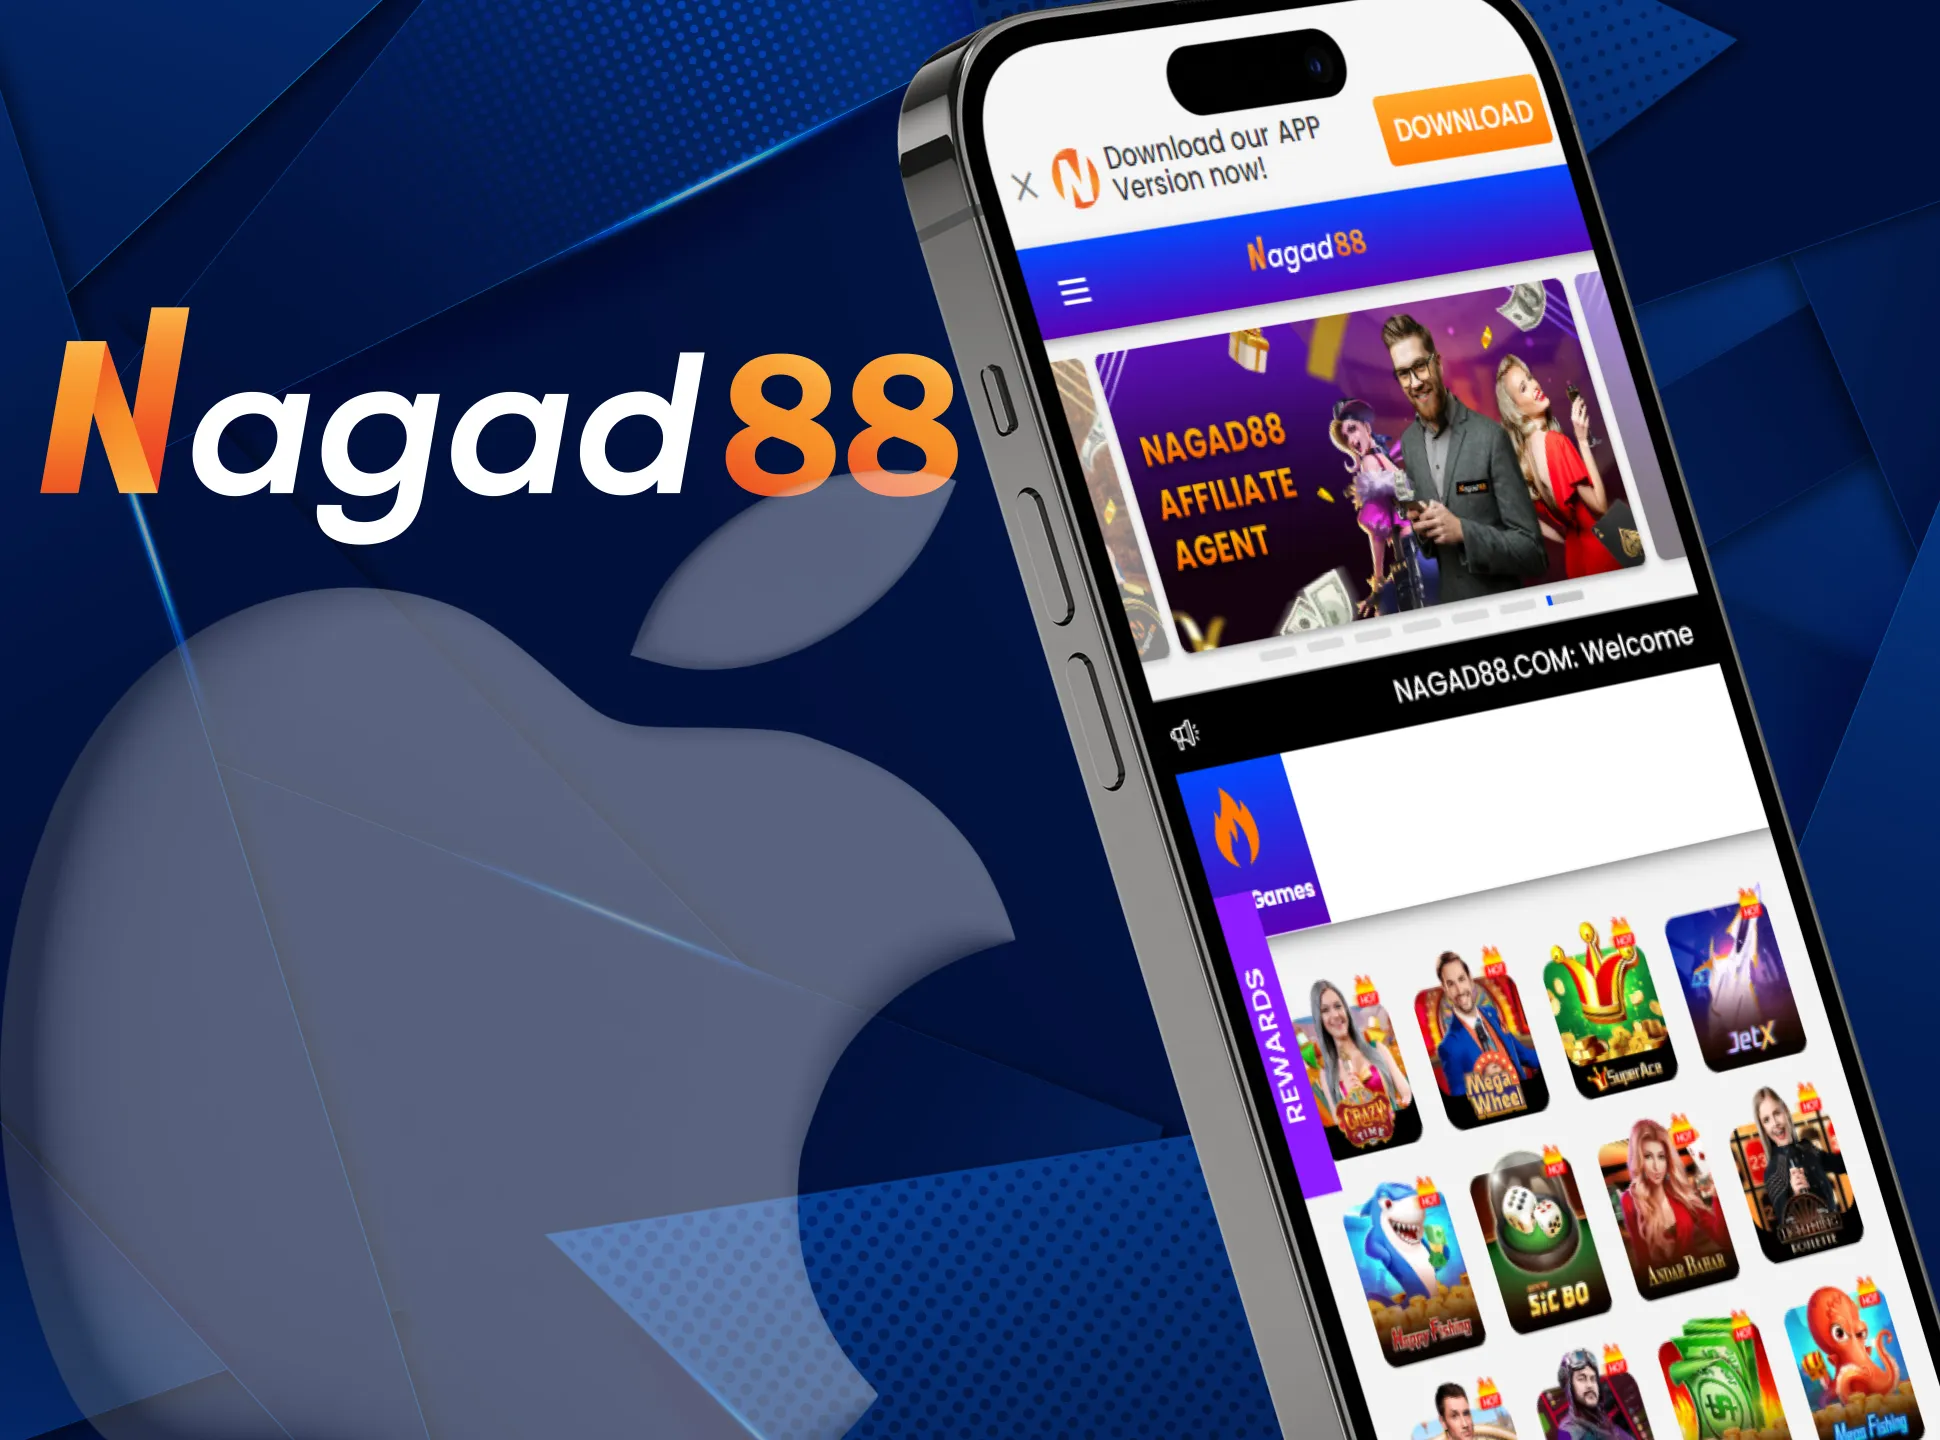 With Nagad88 you can place bets on your iOS phone using the special app.